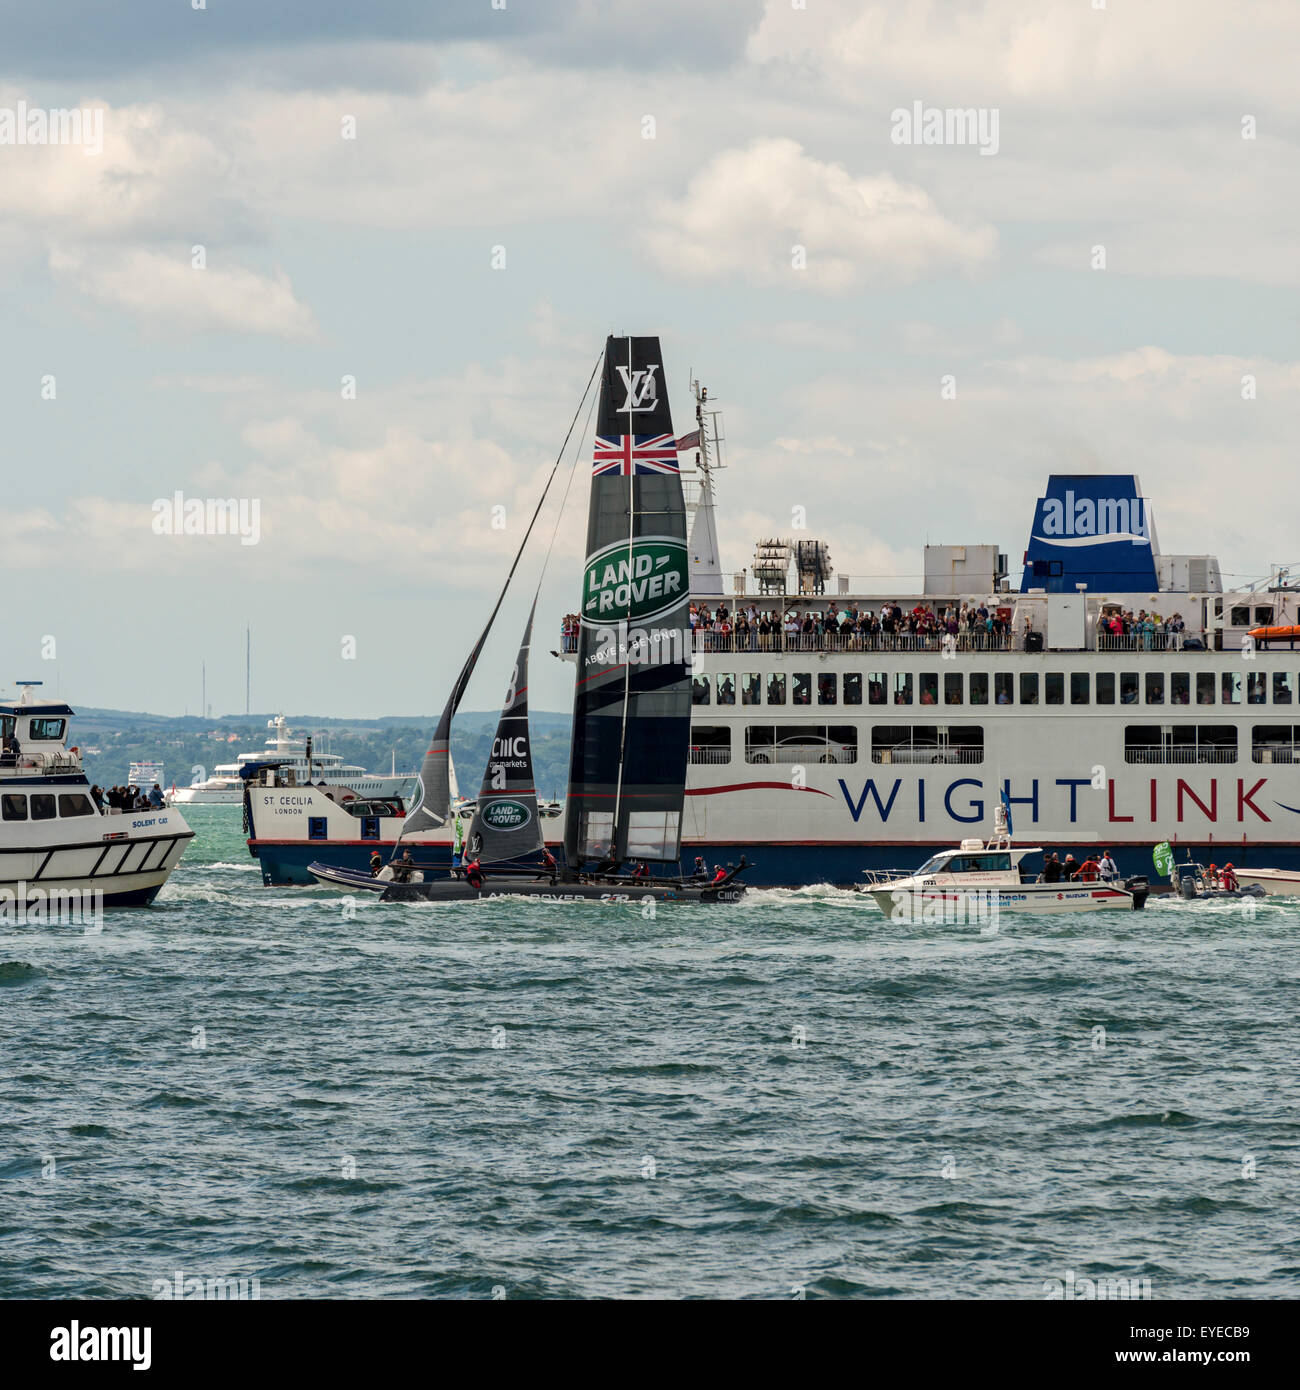 The Team Land Rover BAR America's Cup boat passes a Wight Link car ferry during the America's Cup World Series in Portsmouth Stock Photo